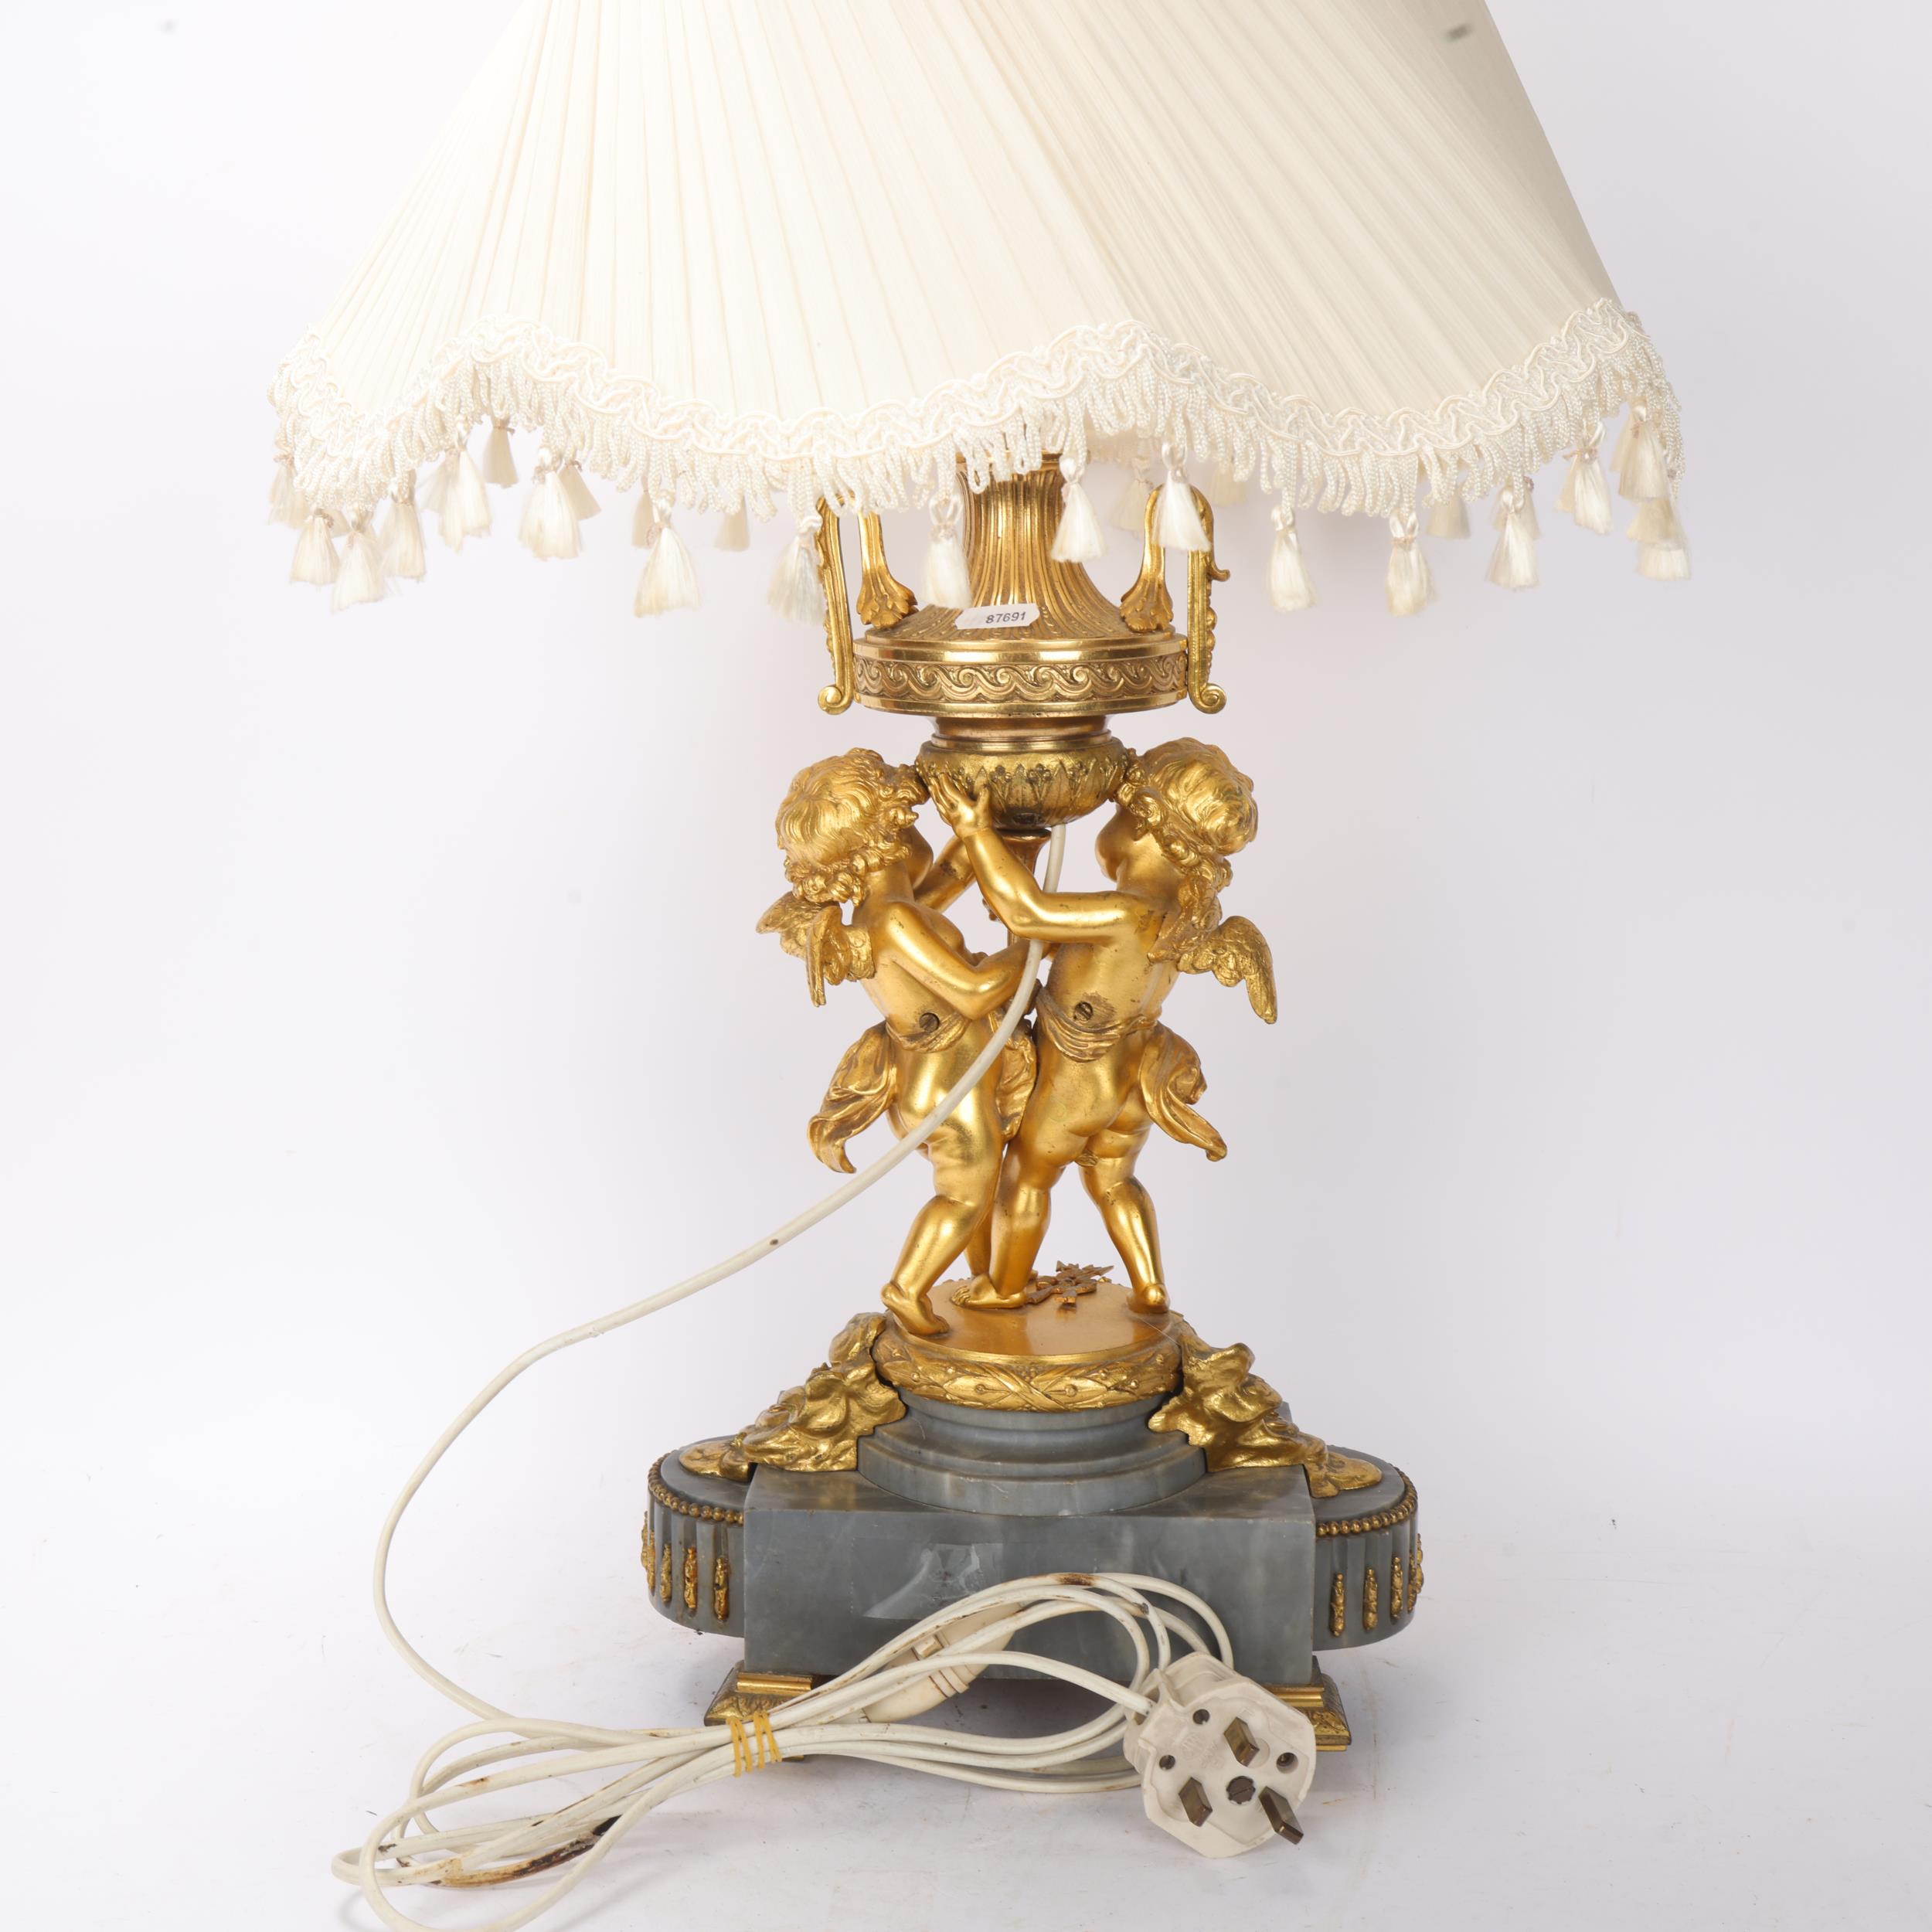 An ornate French gilt-bronze table lamp, supported by 2 cherubs, probably late 19th century, on - Image 3 of 3